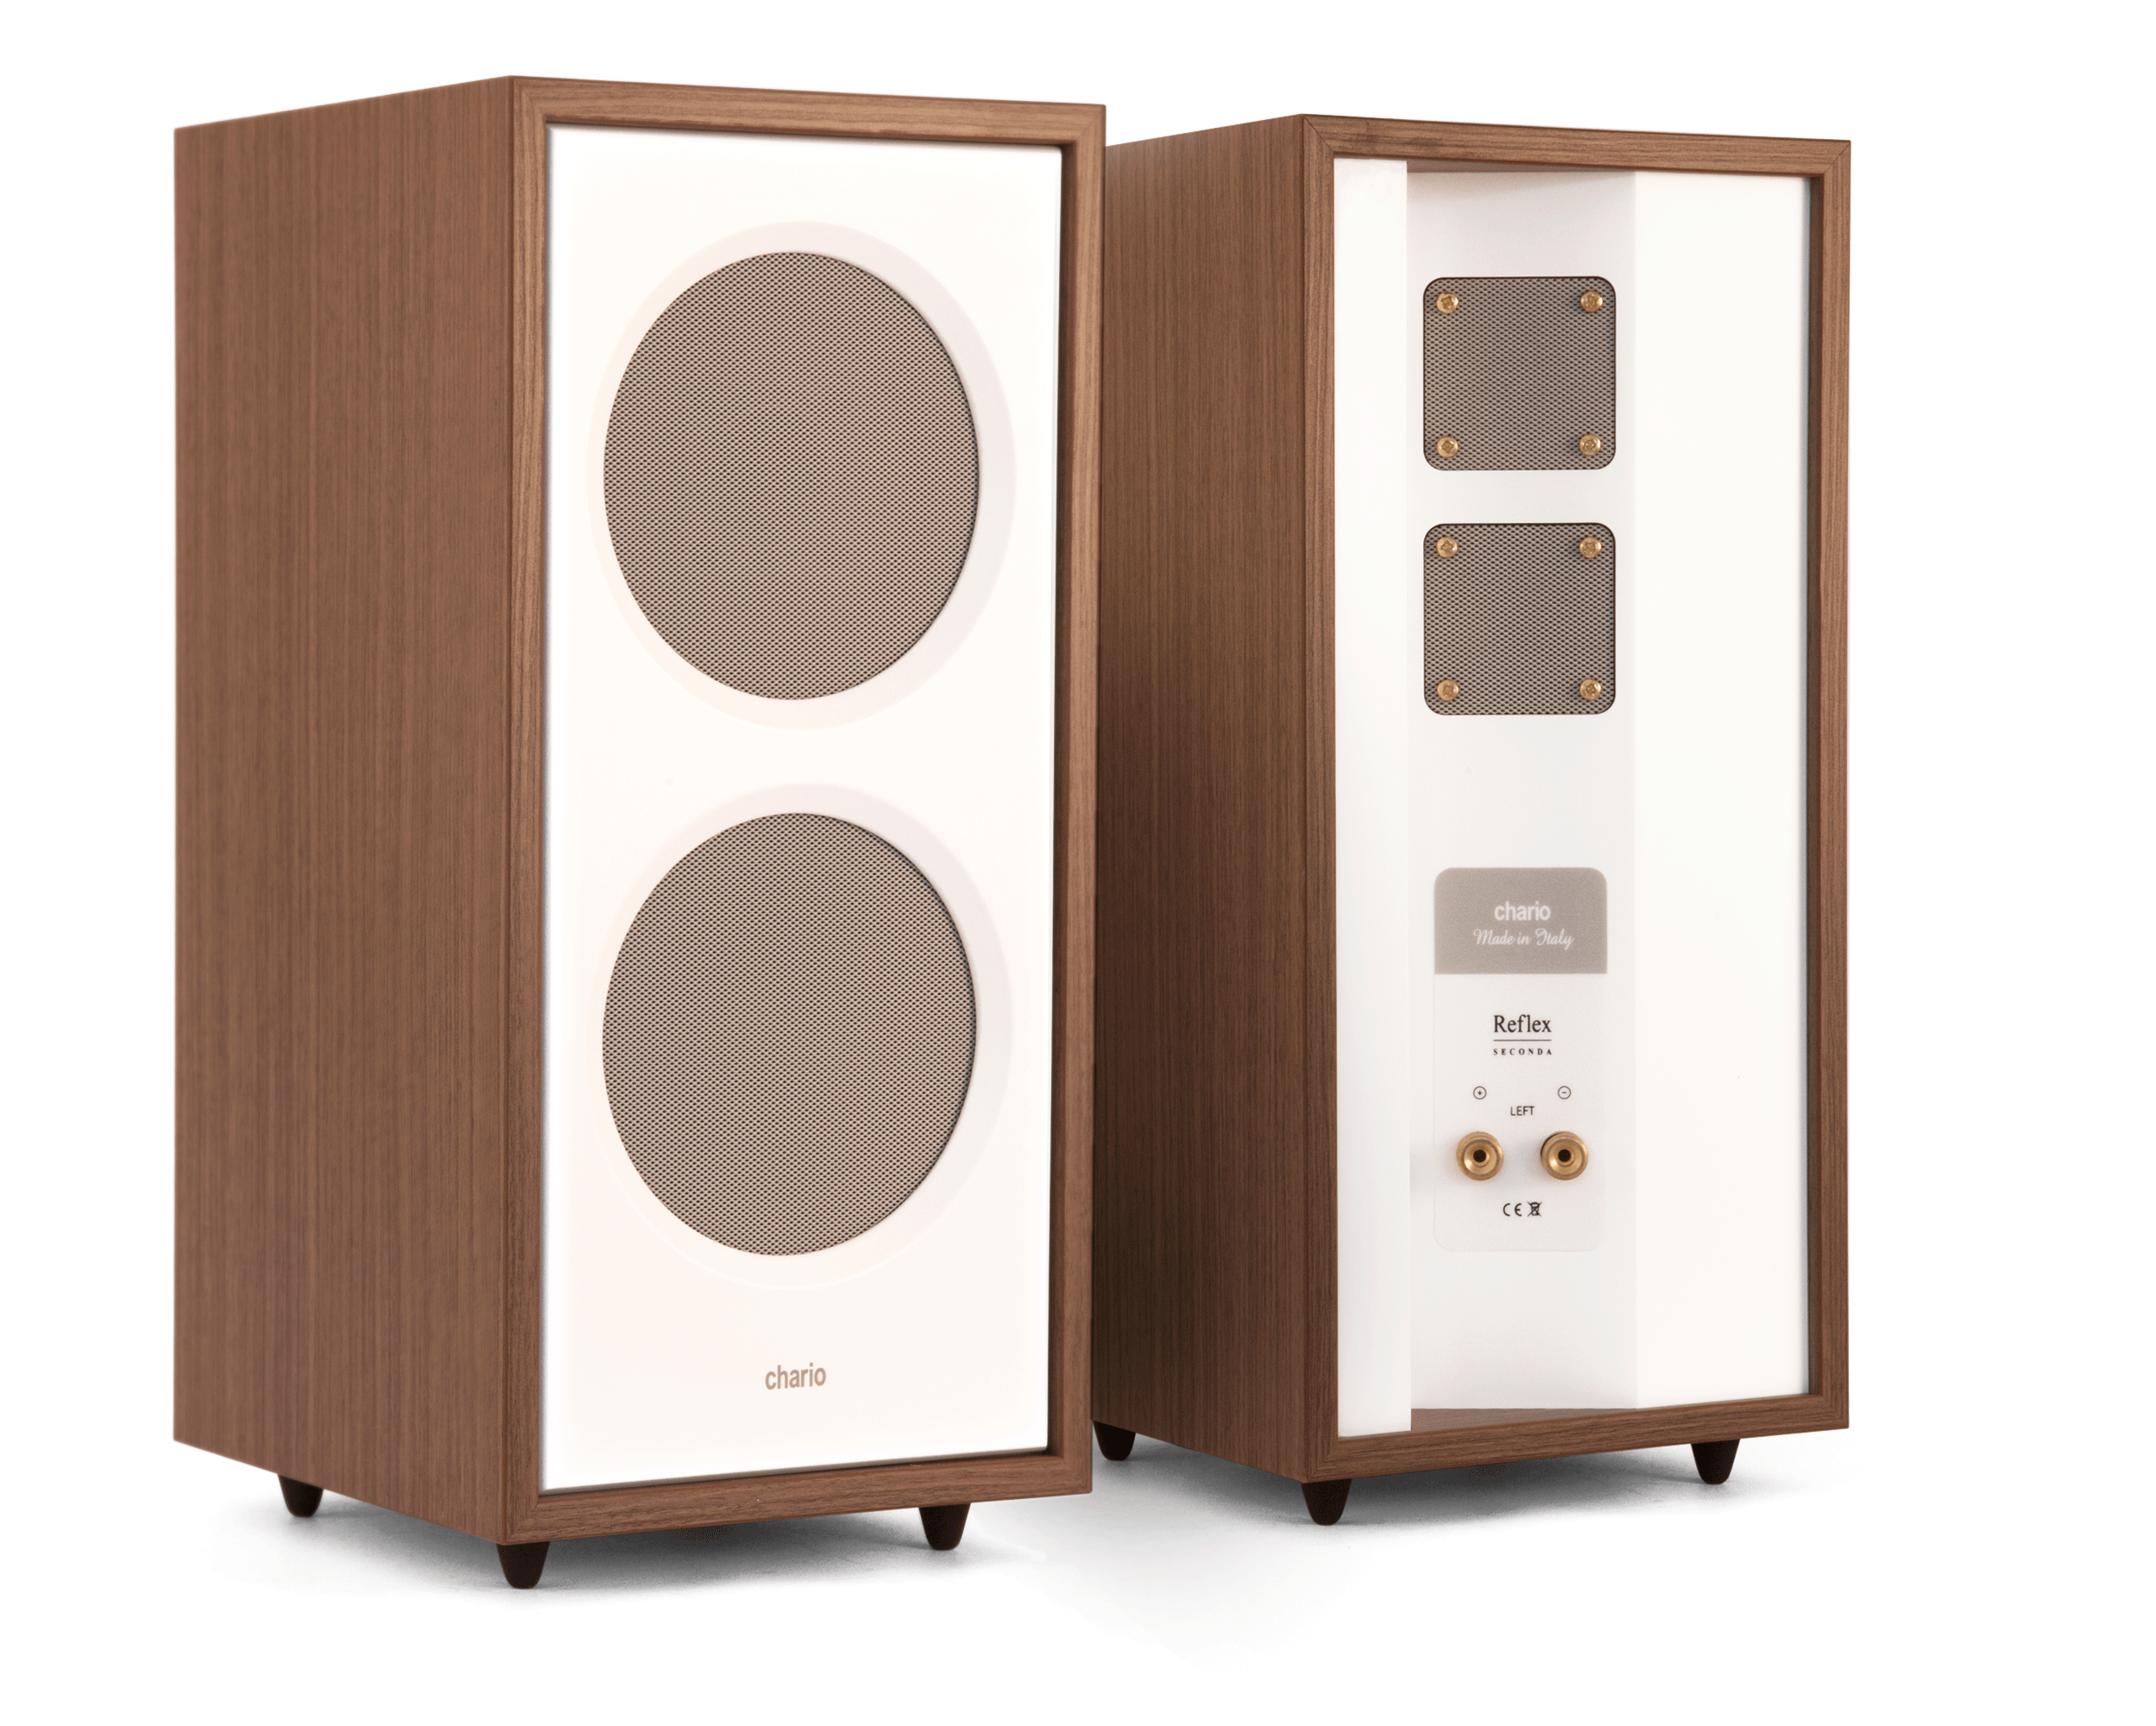 Chario Seconda in an attractive white/walnut combination finish. Note the angled pair of tweeters at the rear